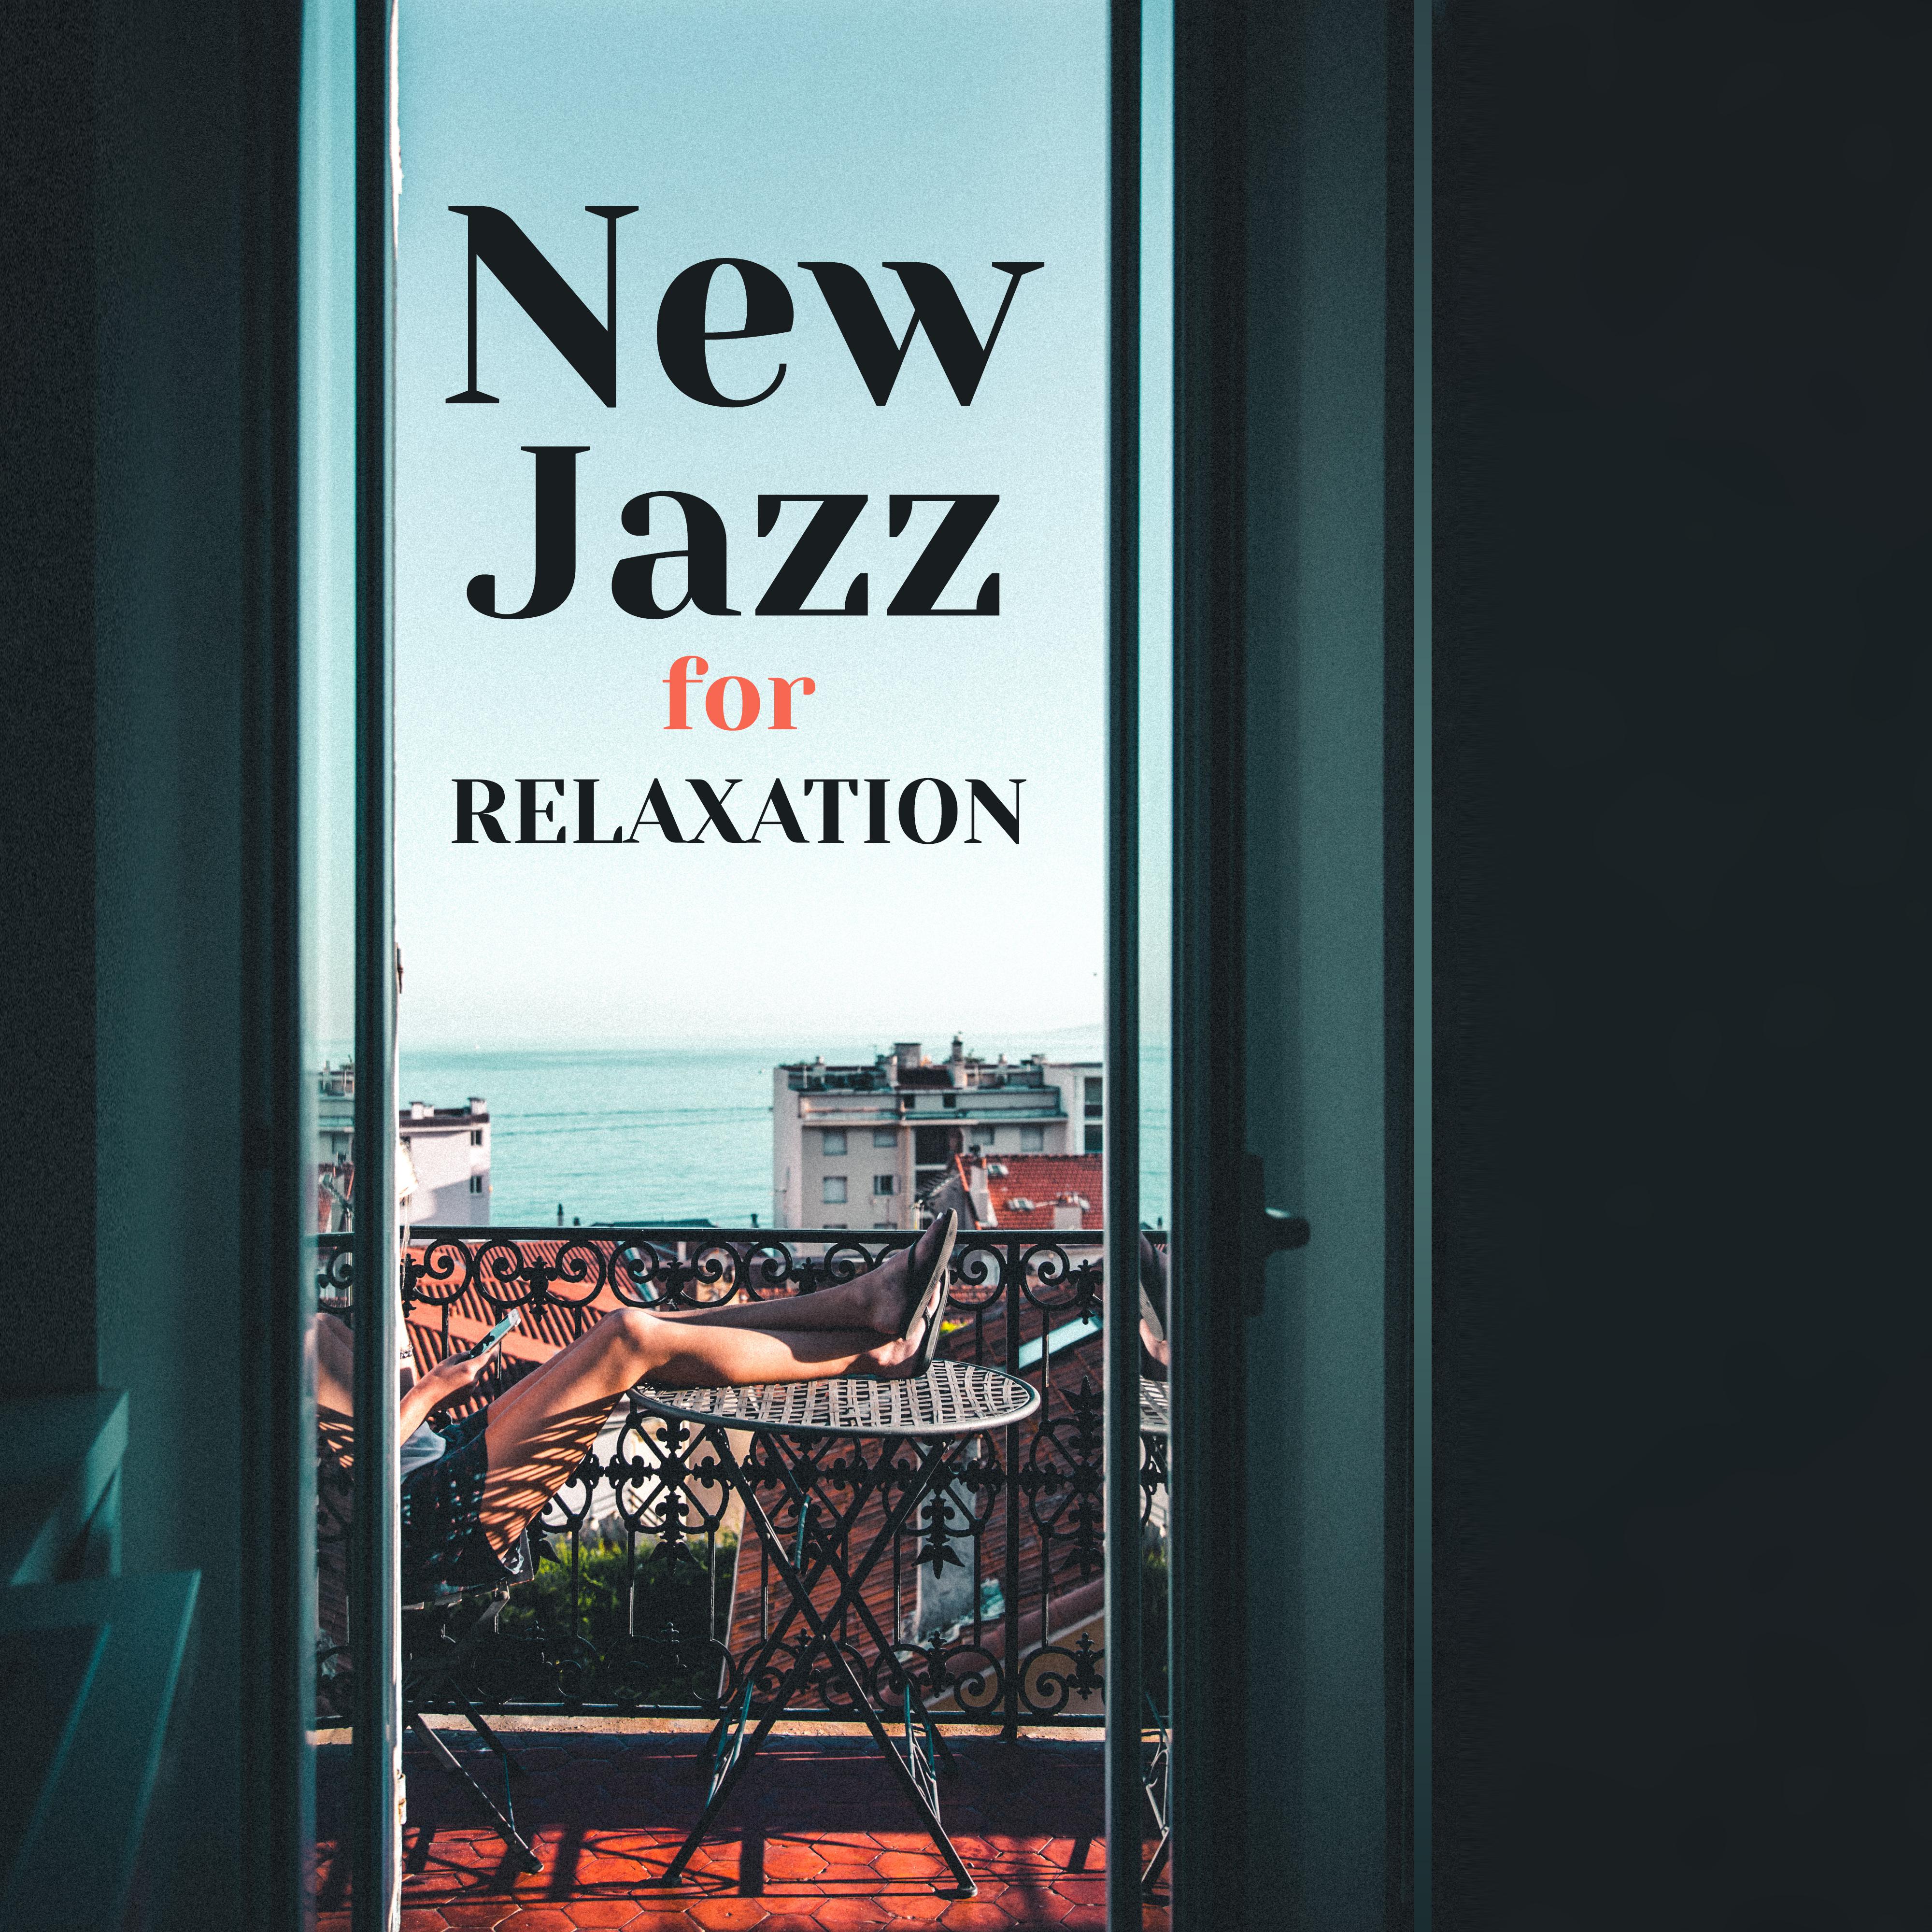 New Jazz for Relaxation